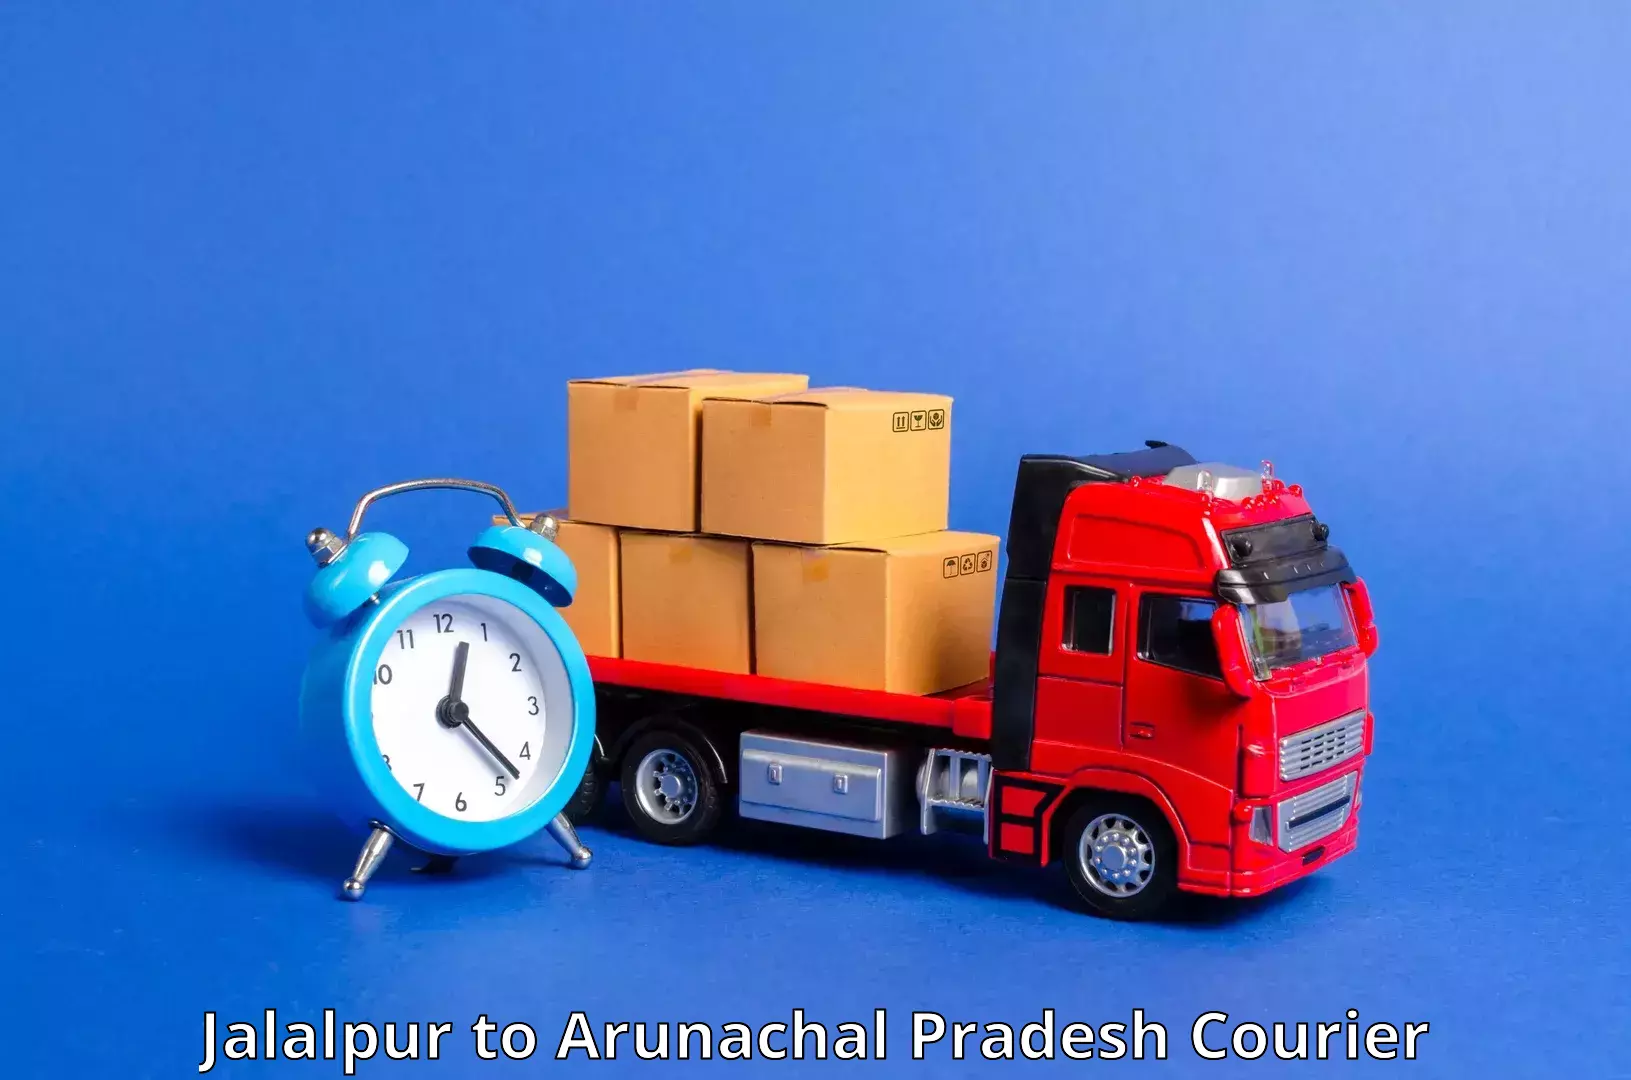 24-hour courier services in Jalalpur to Lower Subansiri